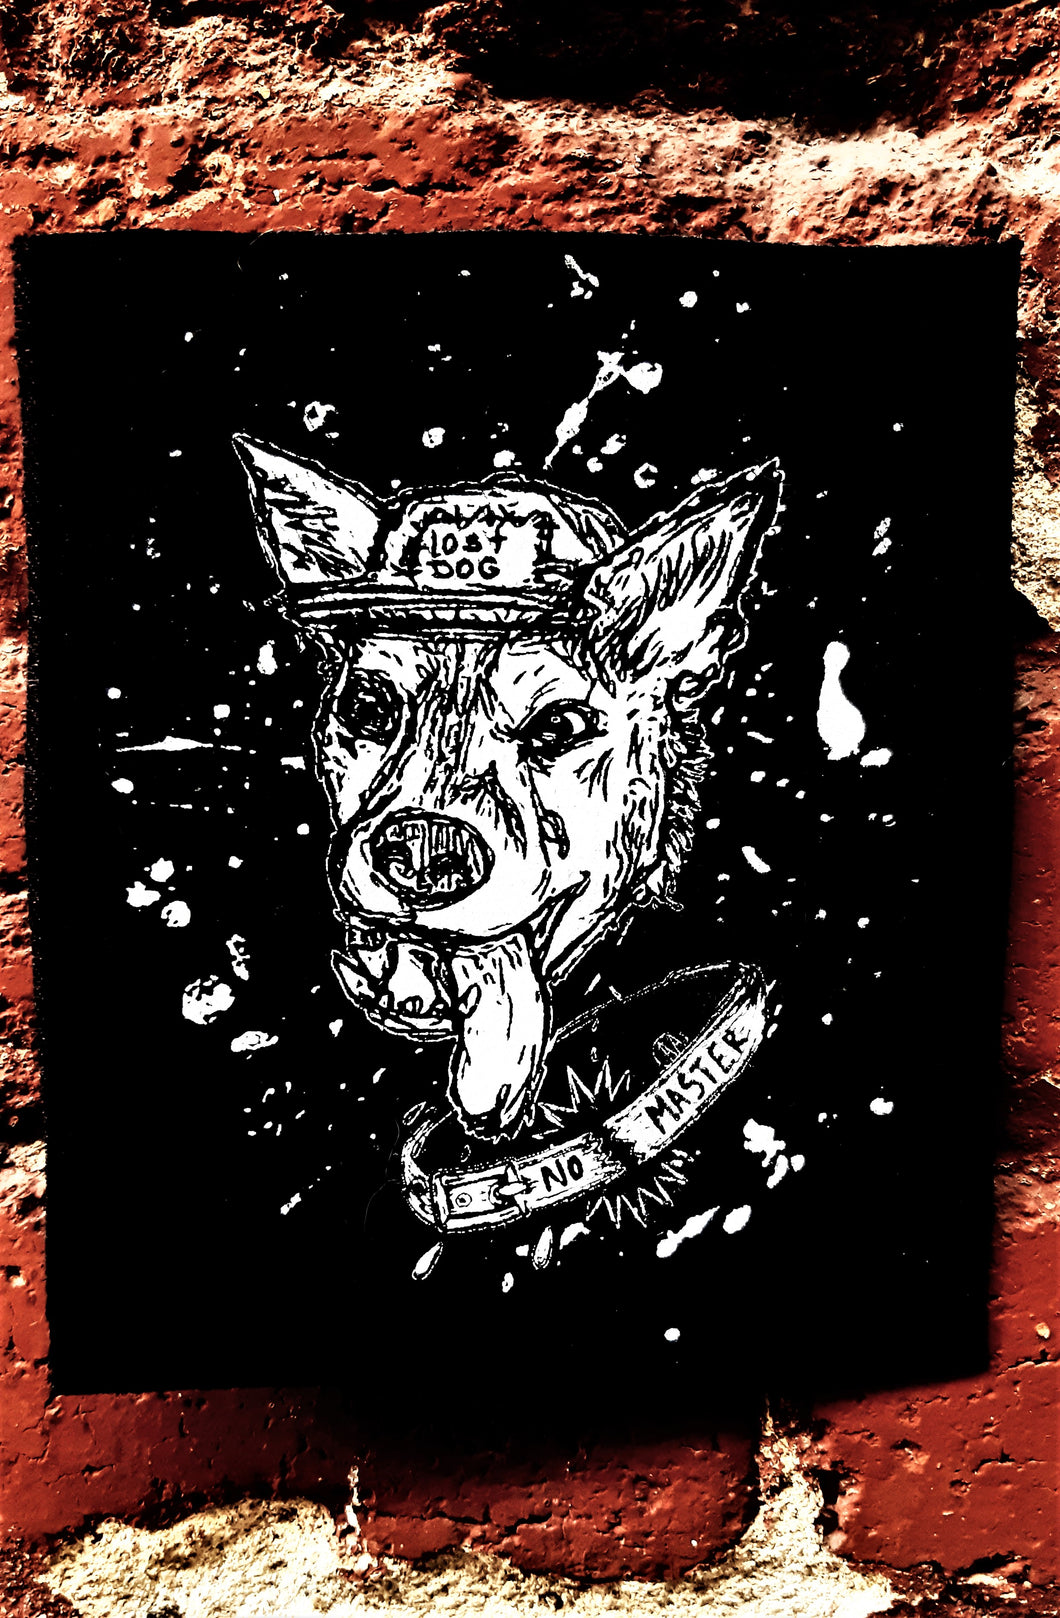 Lost dog / No masters patch - Screen printing on black fabric